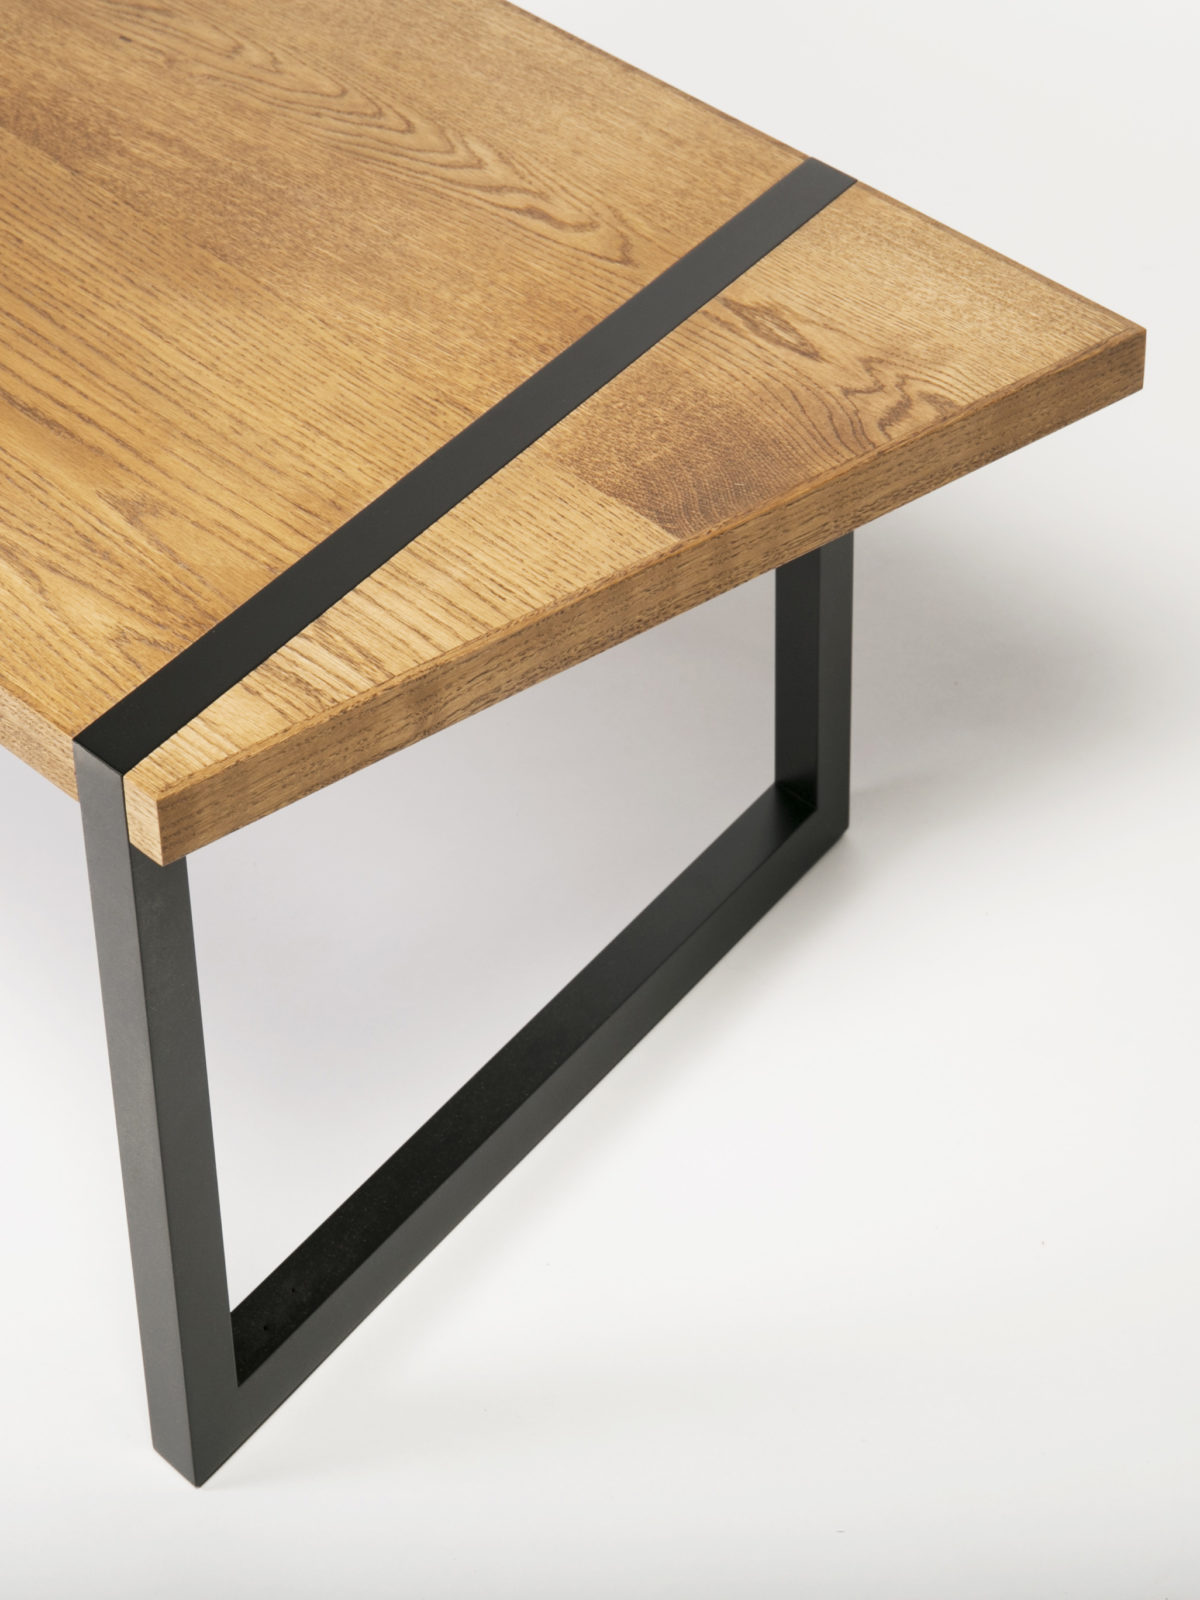 Oak coffee table with built-in angled leg